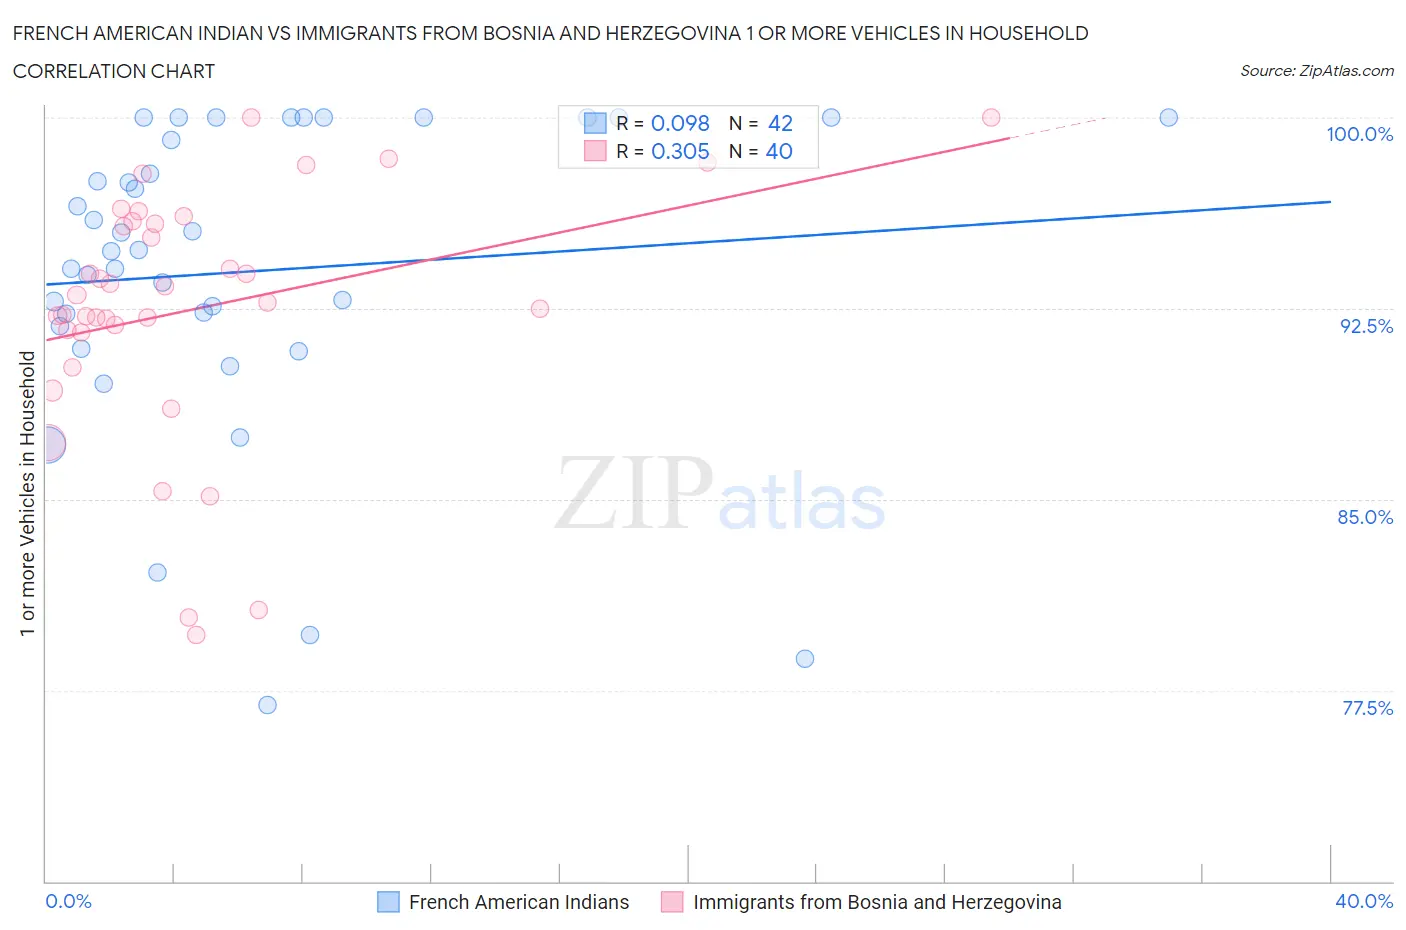 French American Indian vs Immigrants from Bosnia and Herzegovina 1 or more Vehicles in Household